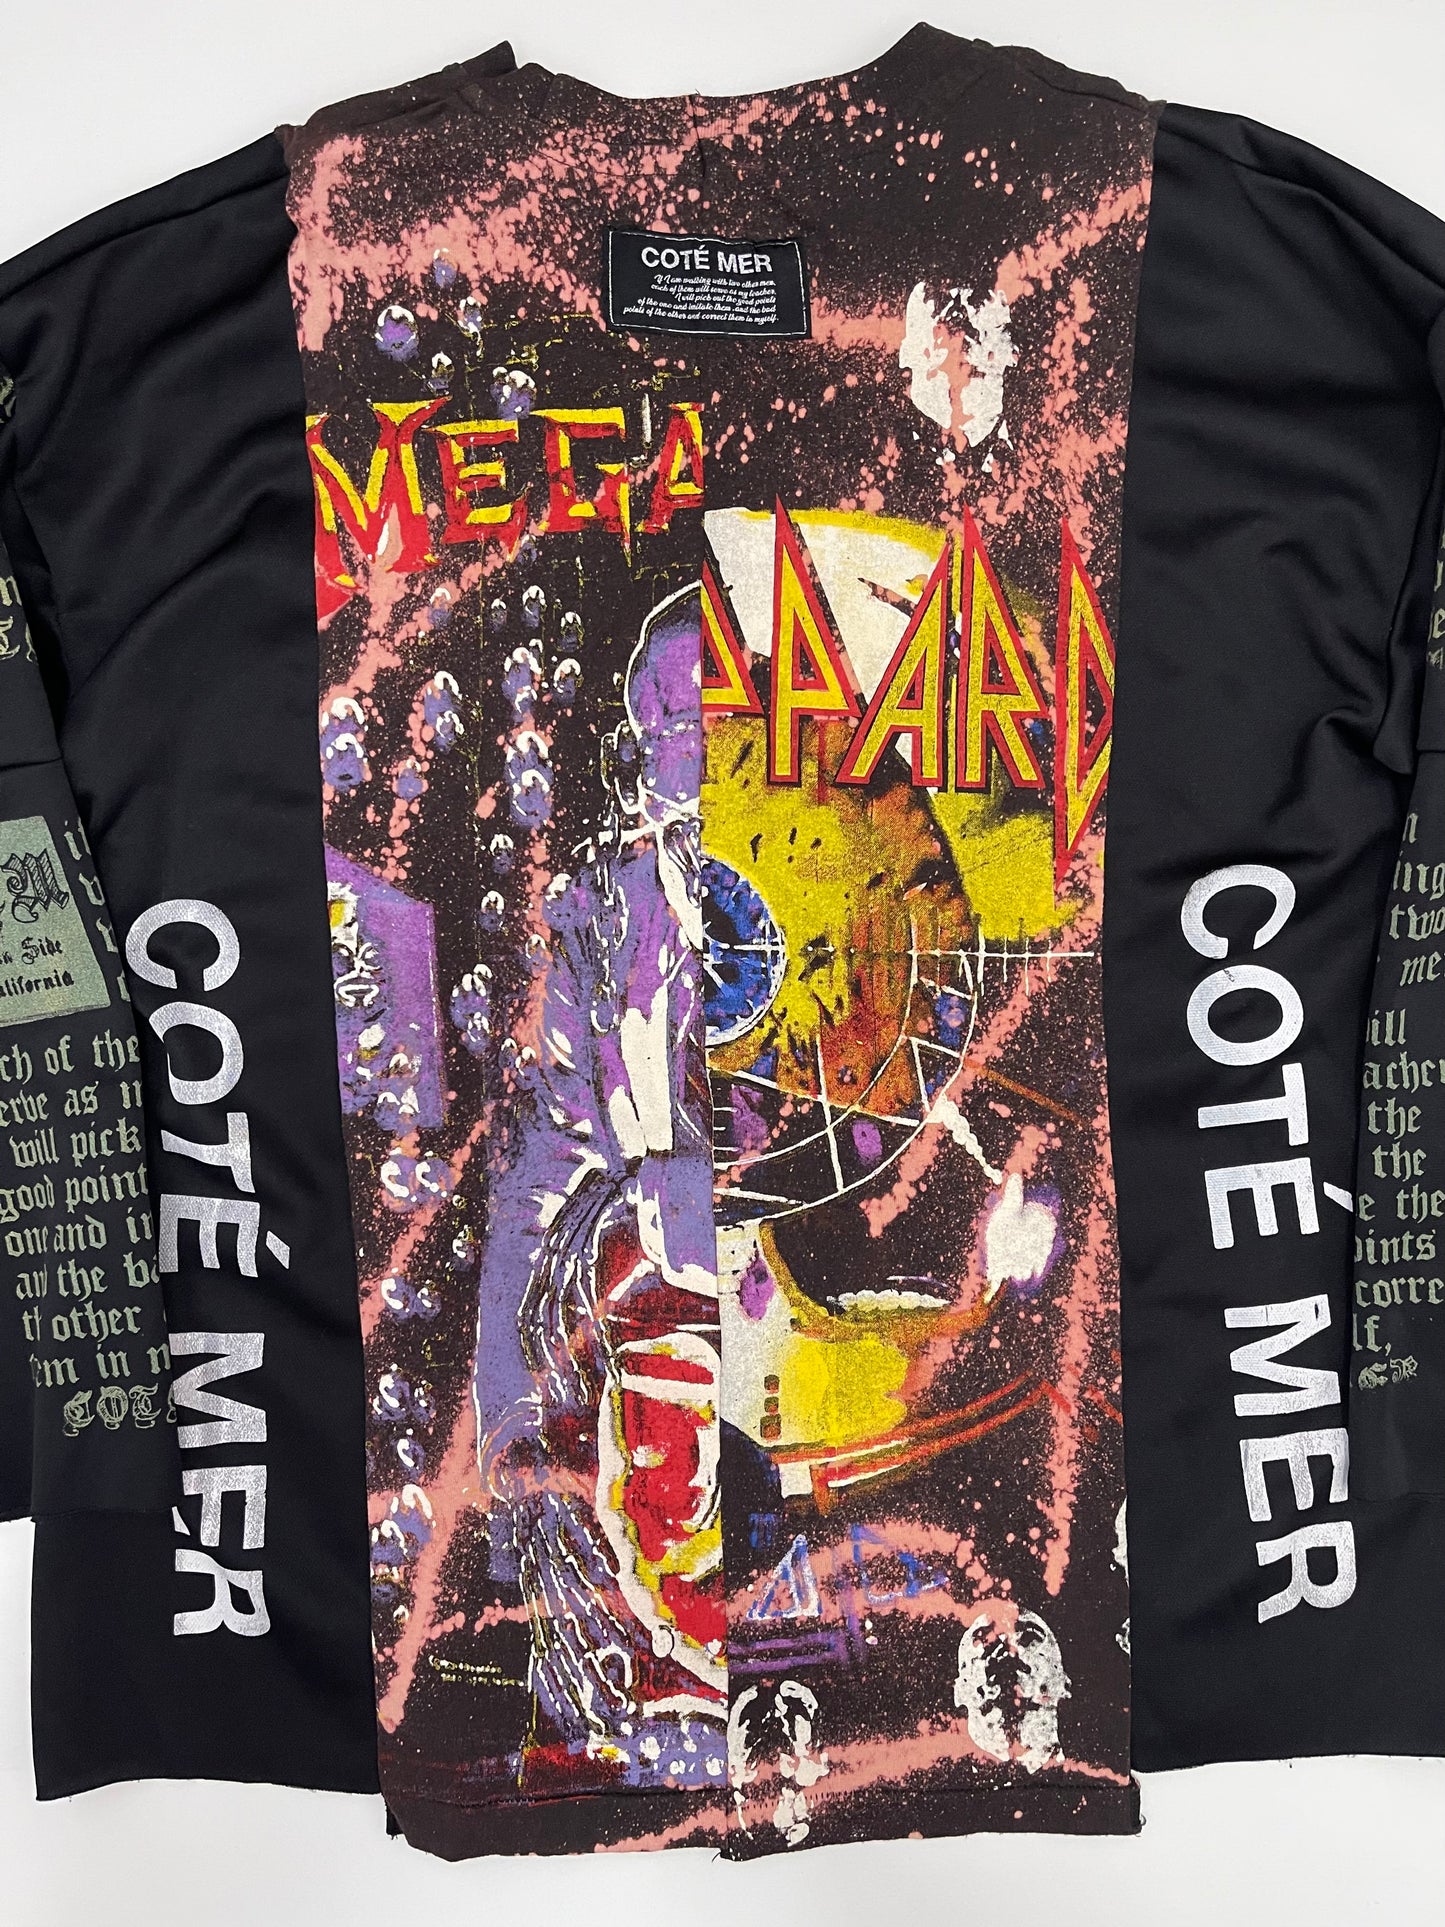 Bespoke Hypebeast Def Leppard Megadeth Japanese Vintage Handmade Custom One and Only One Cote Mer Upscale Street Fashion Boro Remake Bleached Long Band Rap Tee T-shirt ( Size : XL )